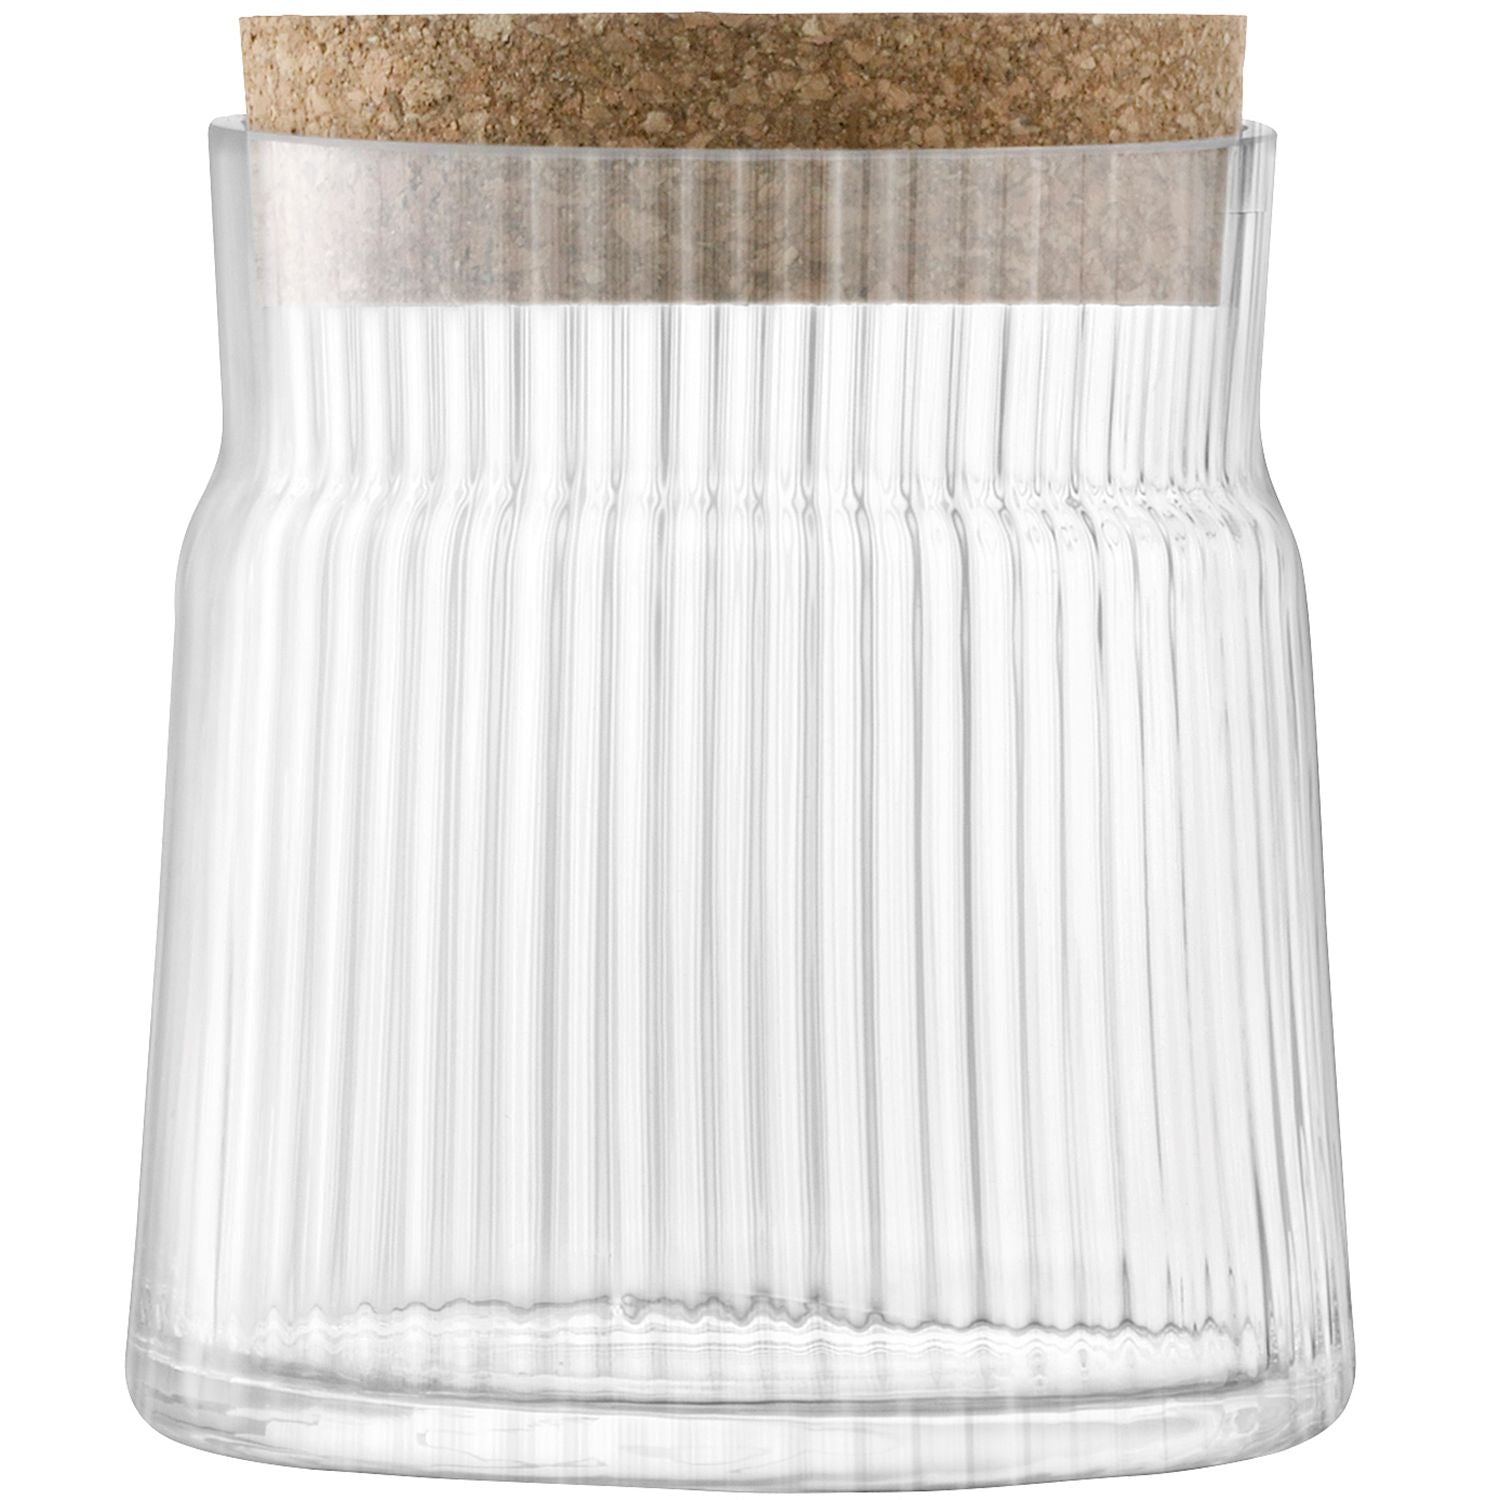 Gio Container with Cork Stopper, Large